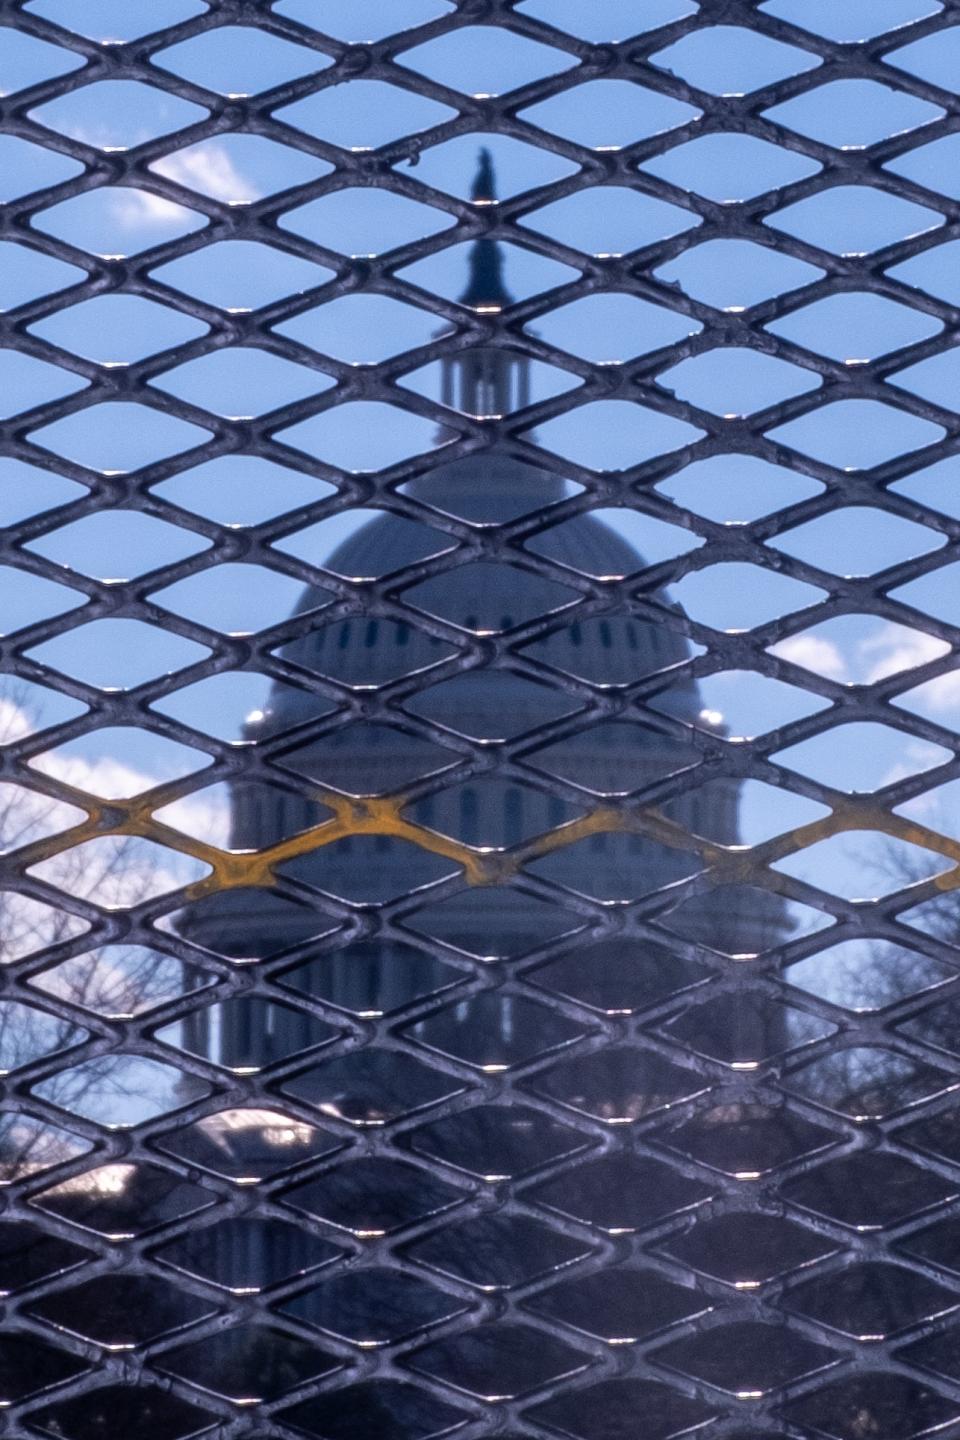 The United States Capitol behind a 10-foot metal fence surrounding the building.